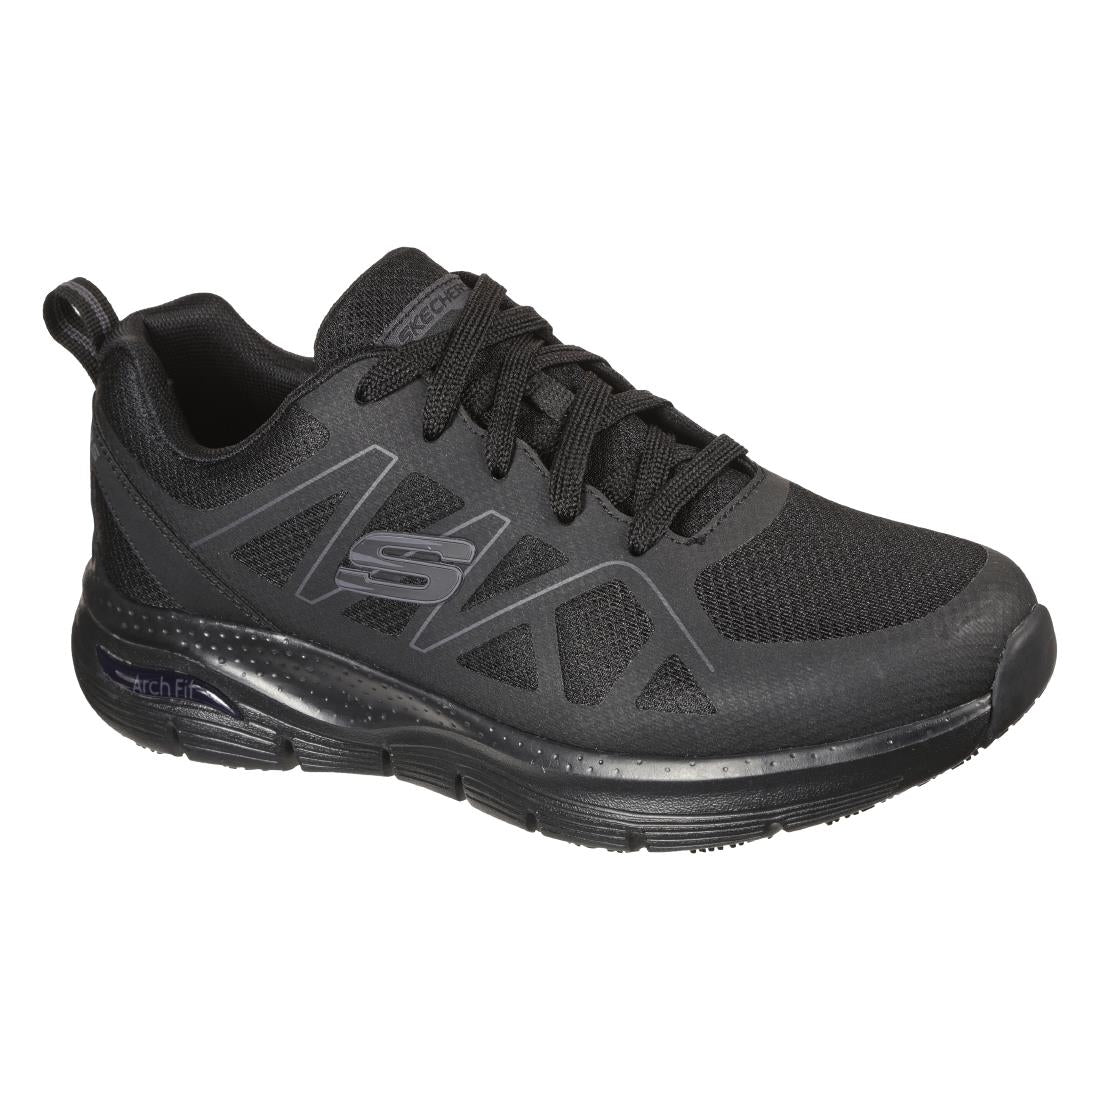 BB673-46 Skechers Axtell Slip Resistant Arch Fit Trainer Size 46 JD Catering Equipment Solutions Ltd